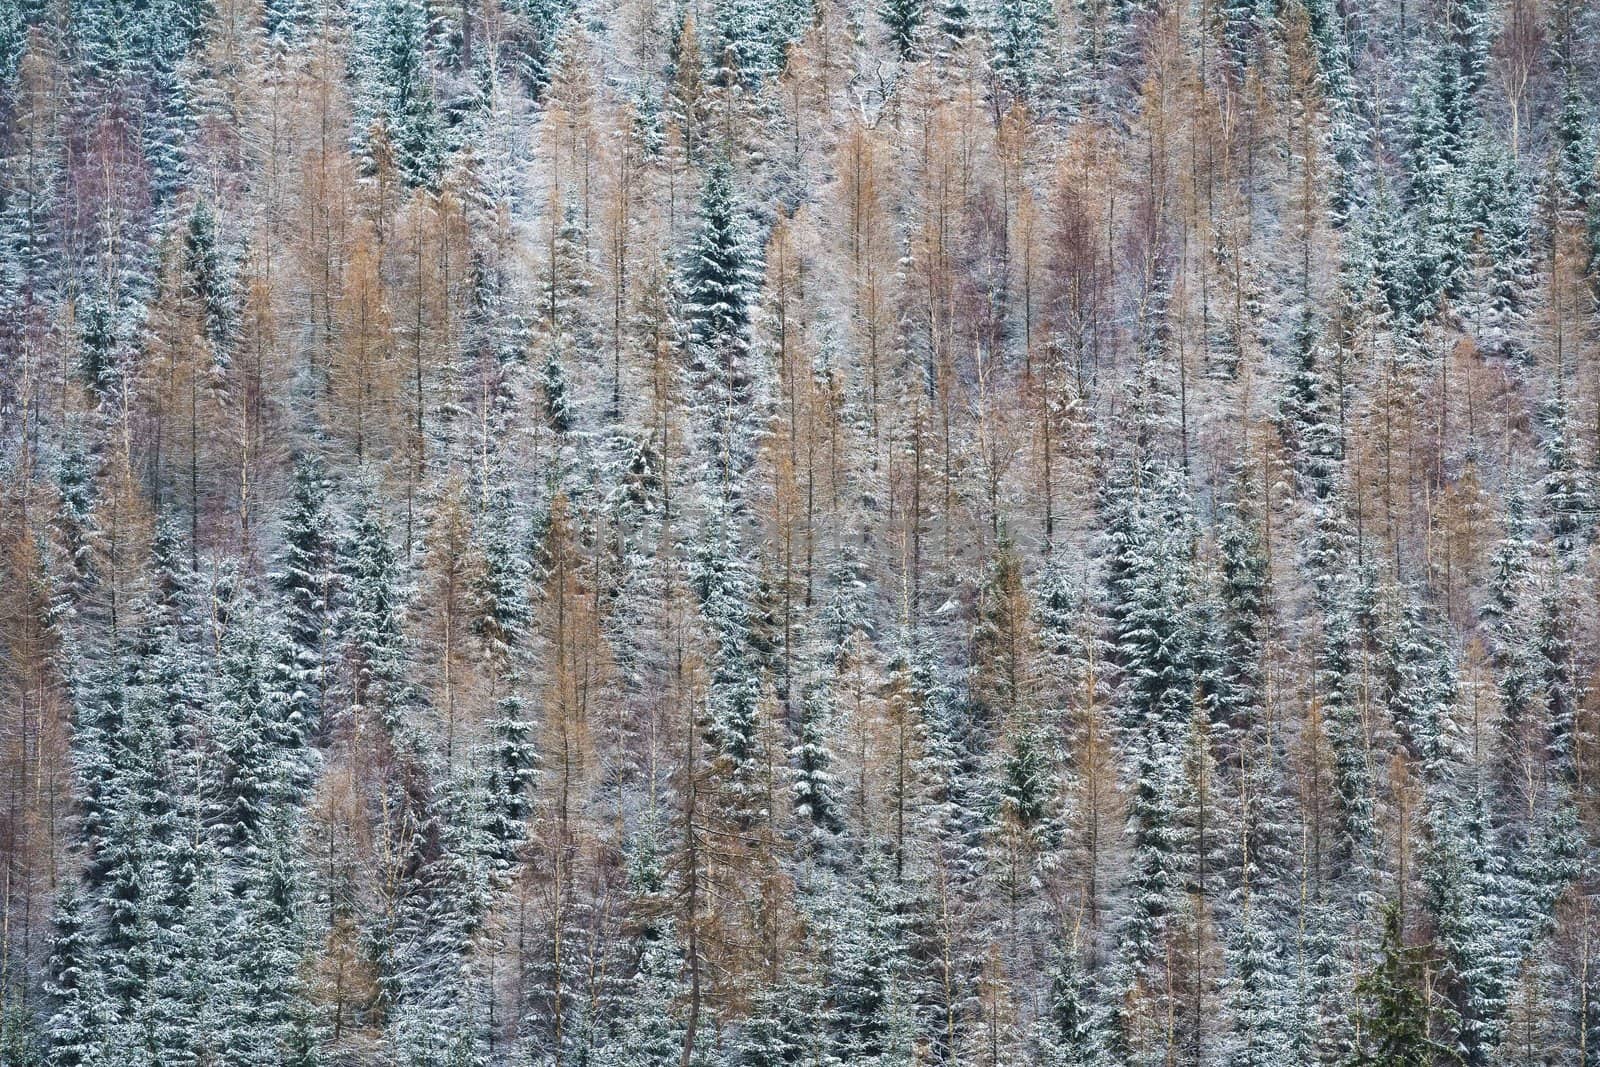 Texture of strees covered with snow on a side of a a hill - winter scene